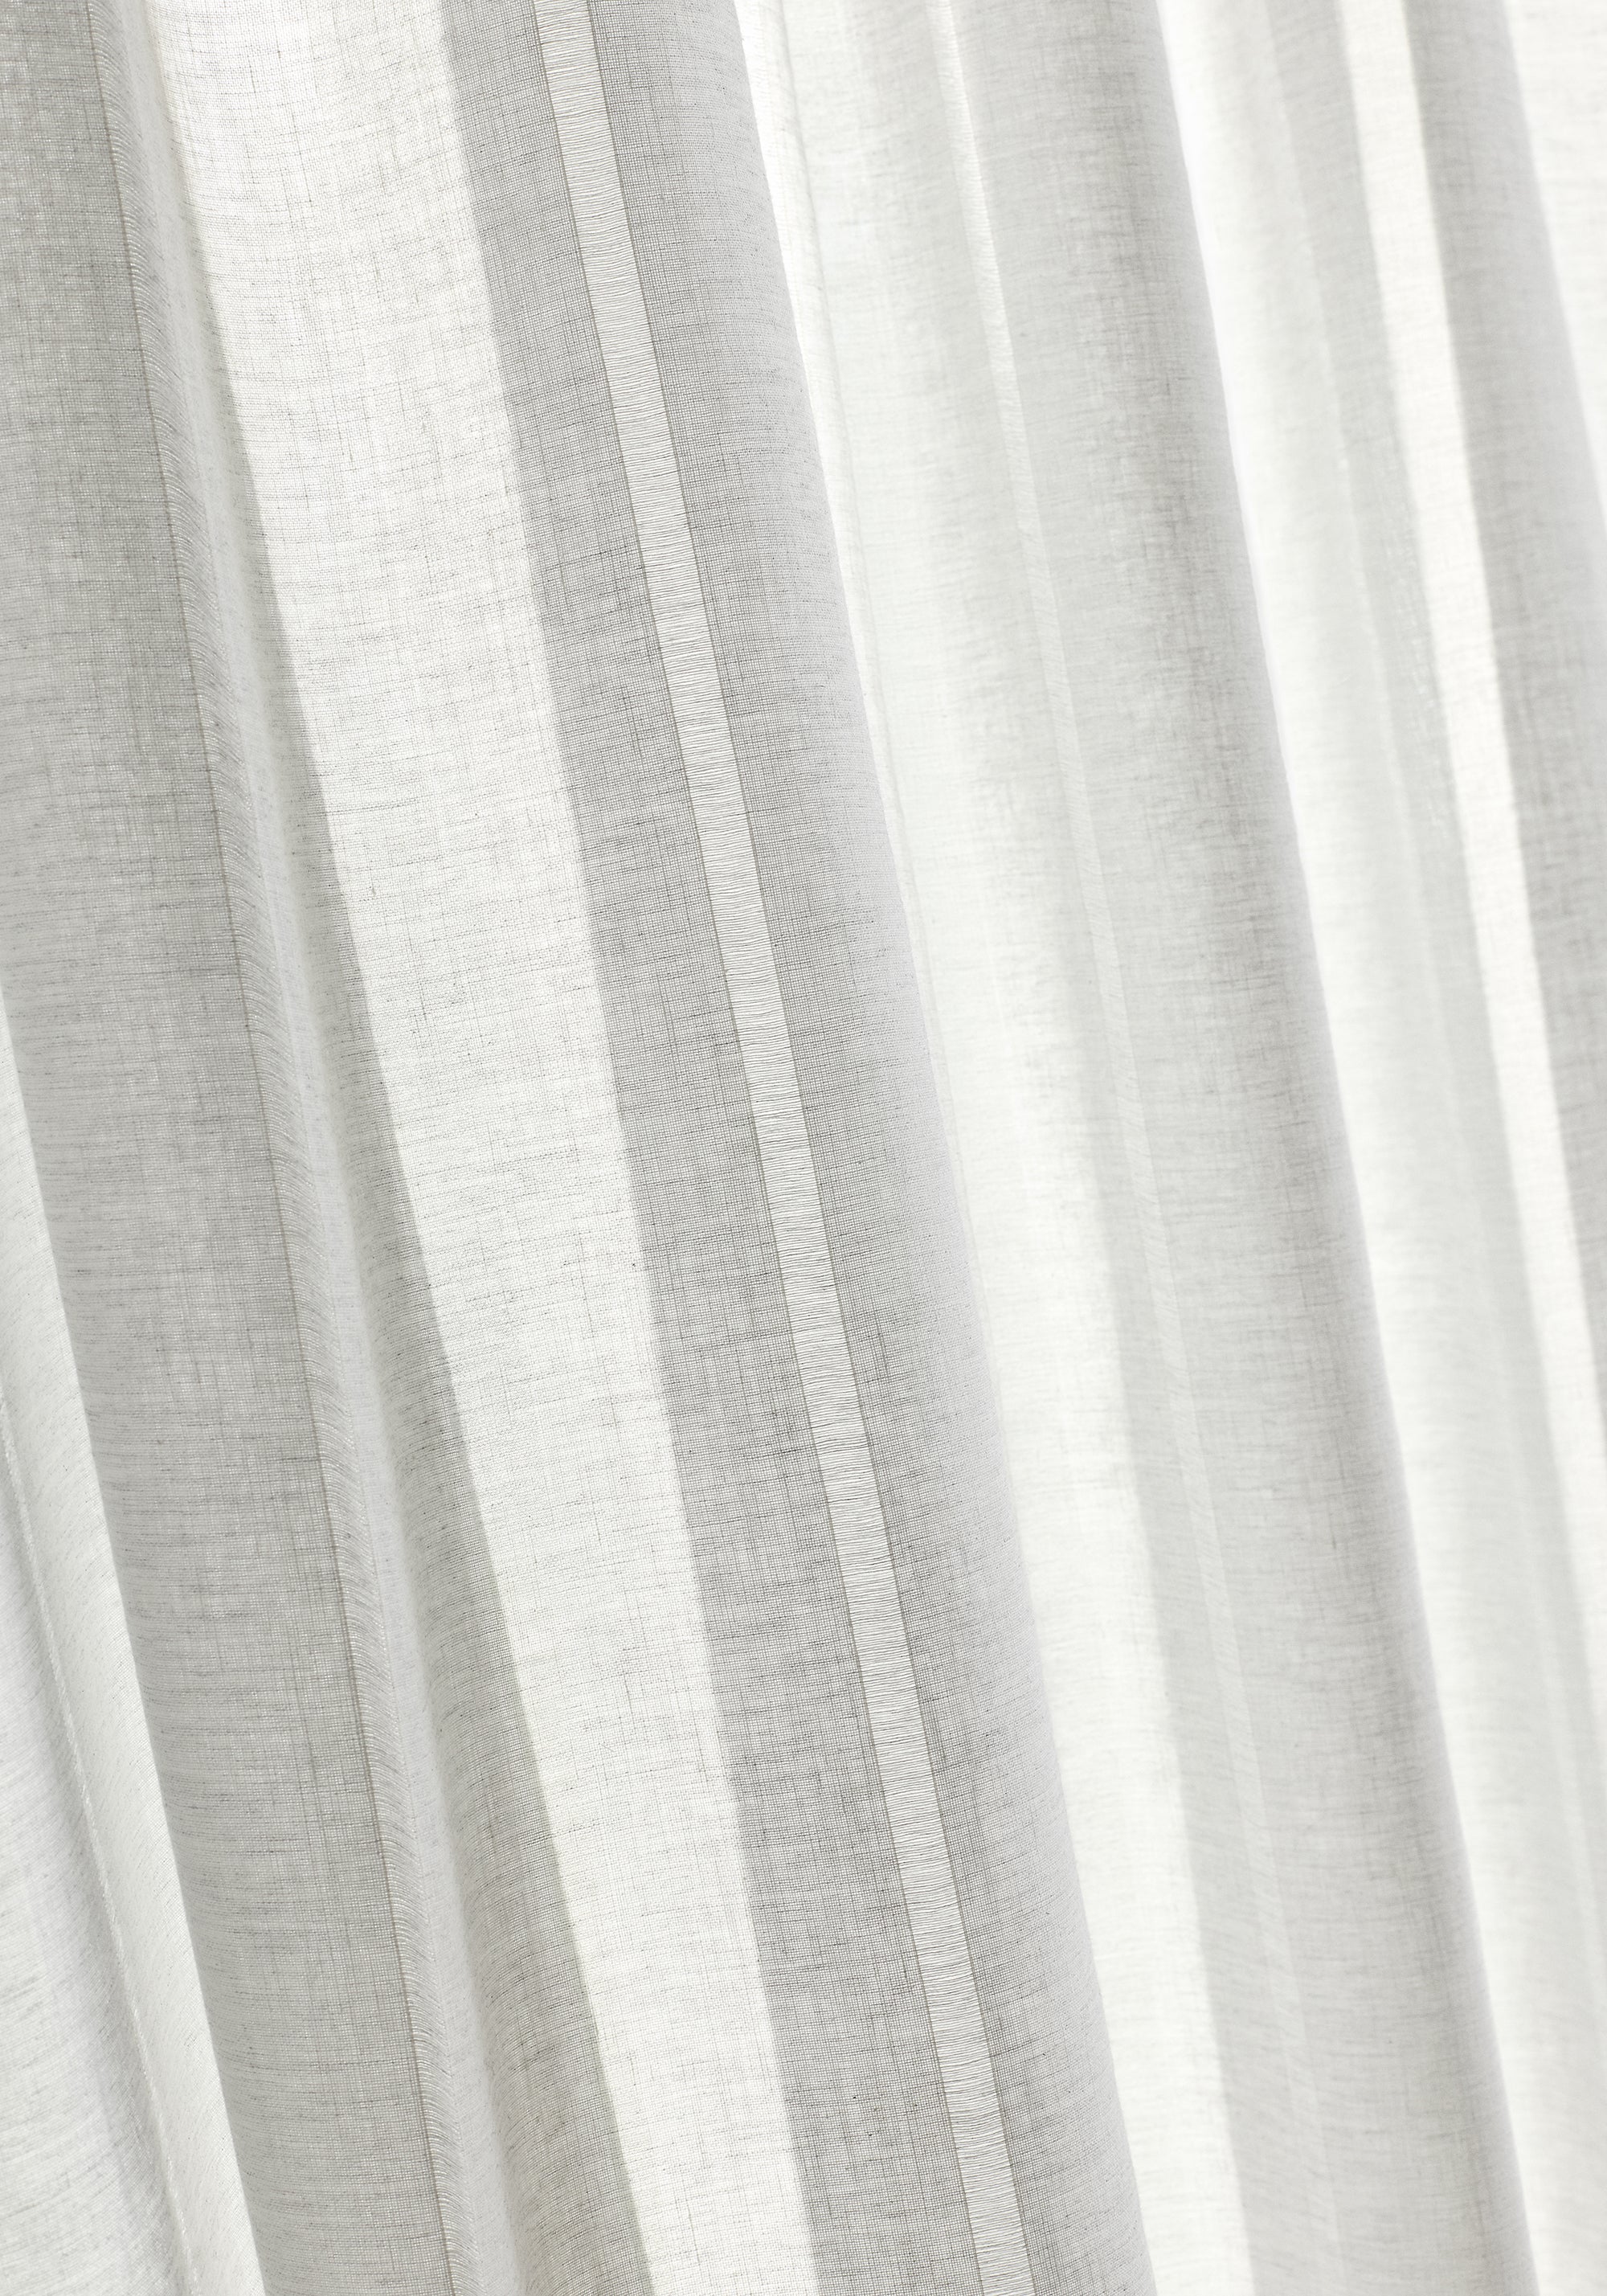 Up close sheer in Amara Stripe fabric in platinum color - pattern number FWW8239 - by Thibaut in the Aura collection